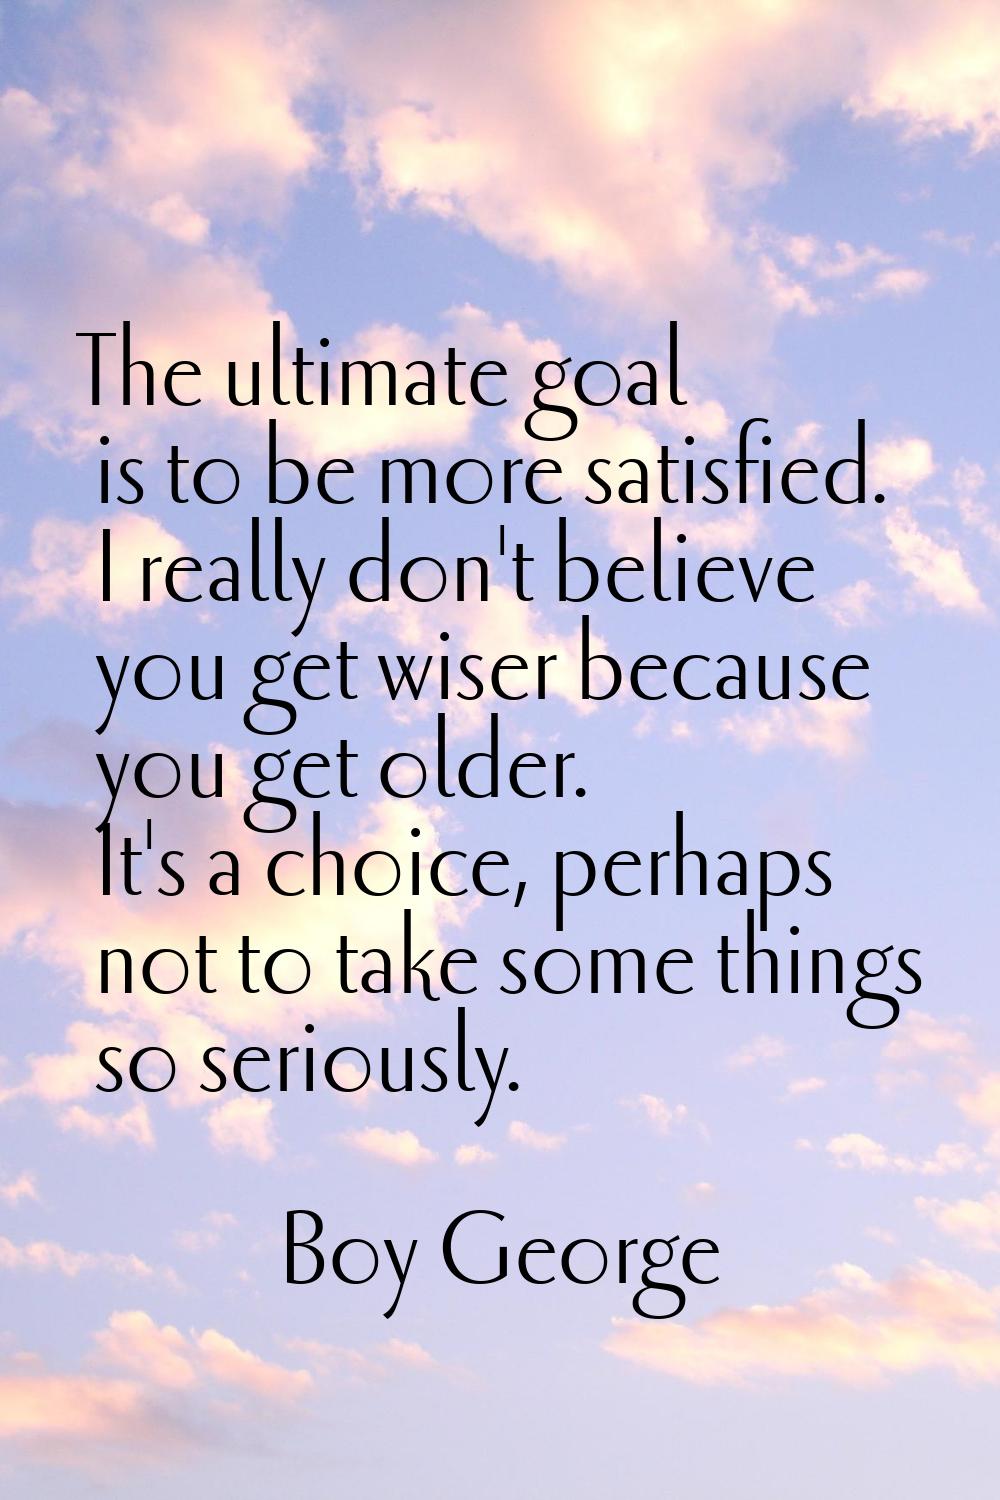 The ultimate goal is to be more satisfied. I really don't believe you get wiser because you get old